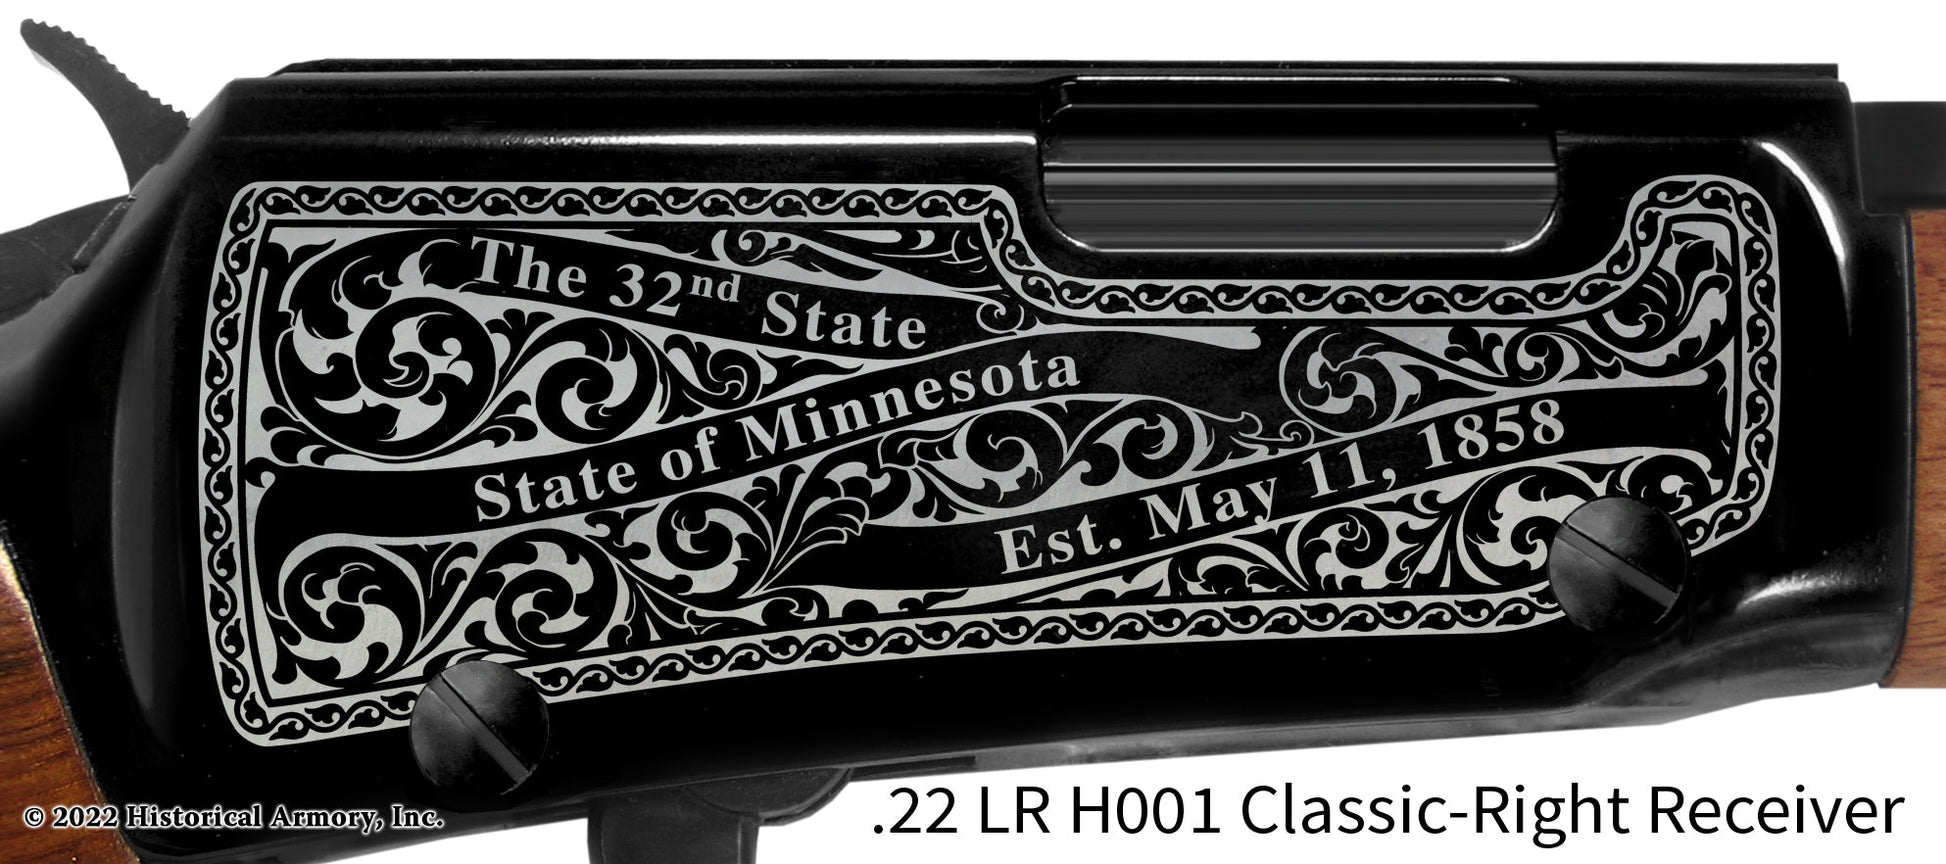 Waseca County Minnesota Engraved Henry H001 Rifle